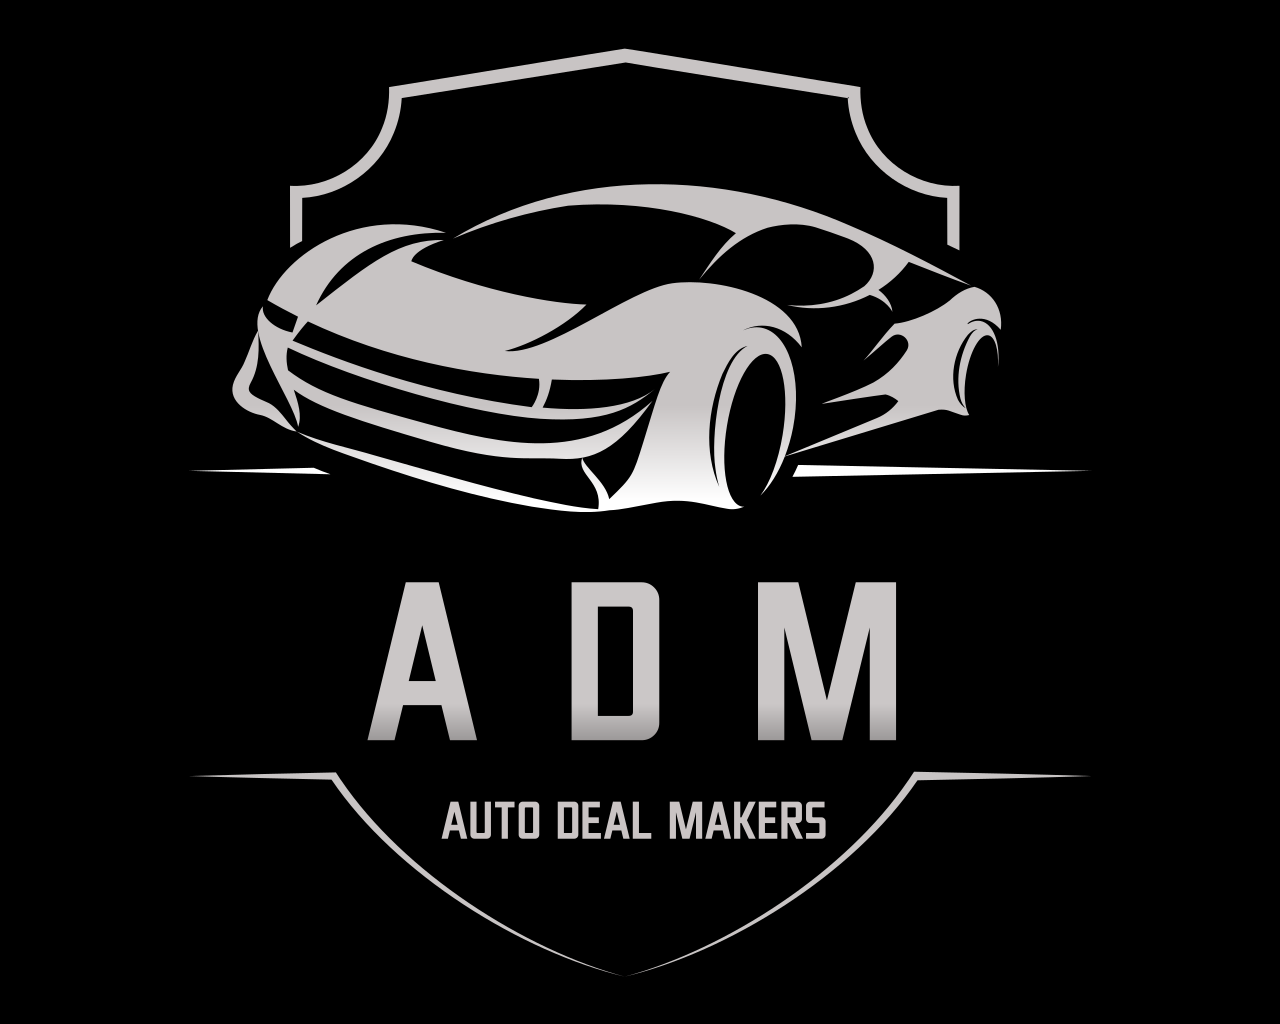 Auto Deal Makers